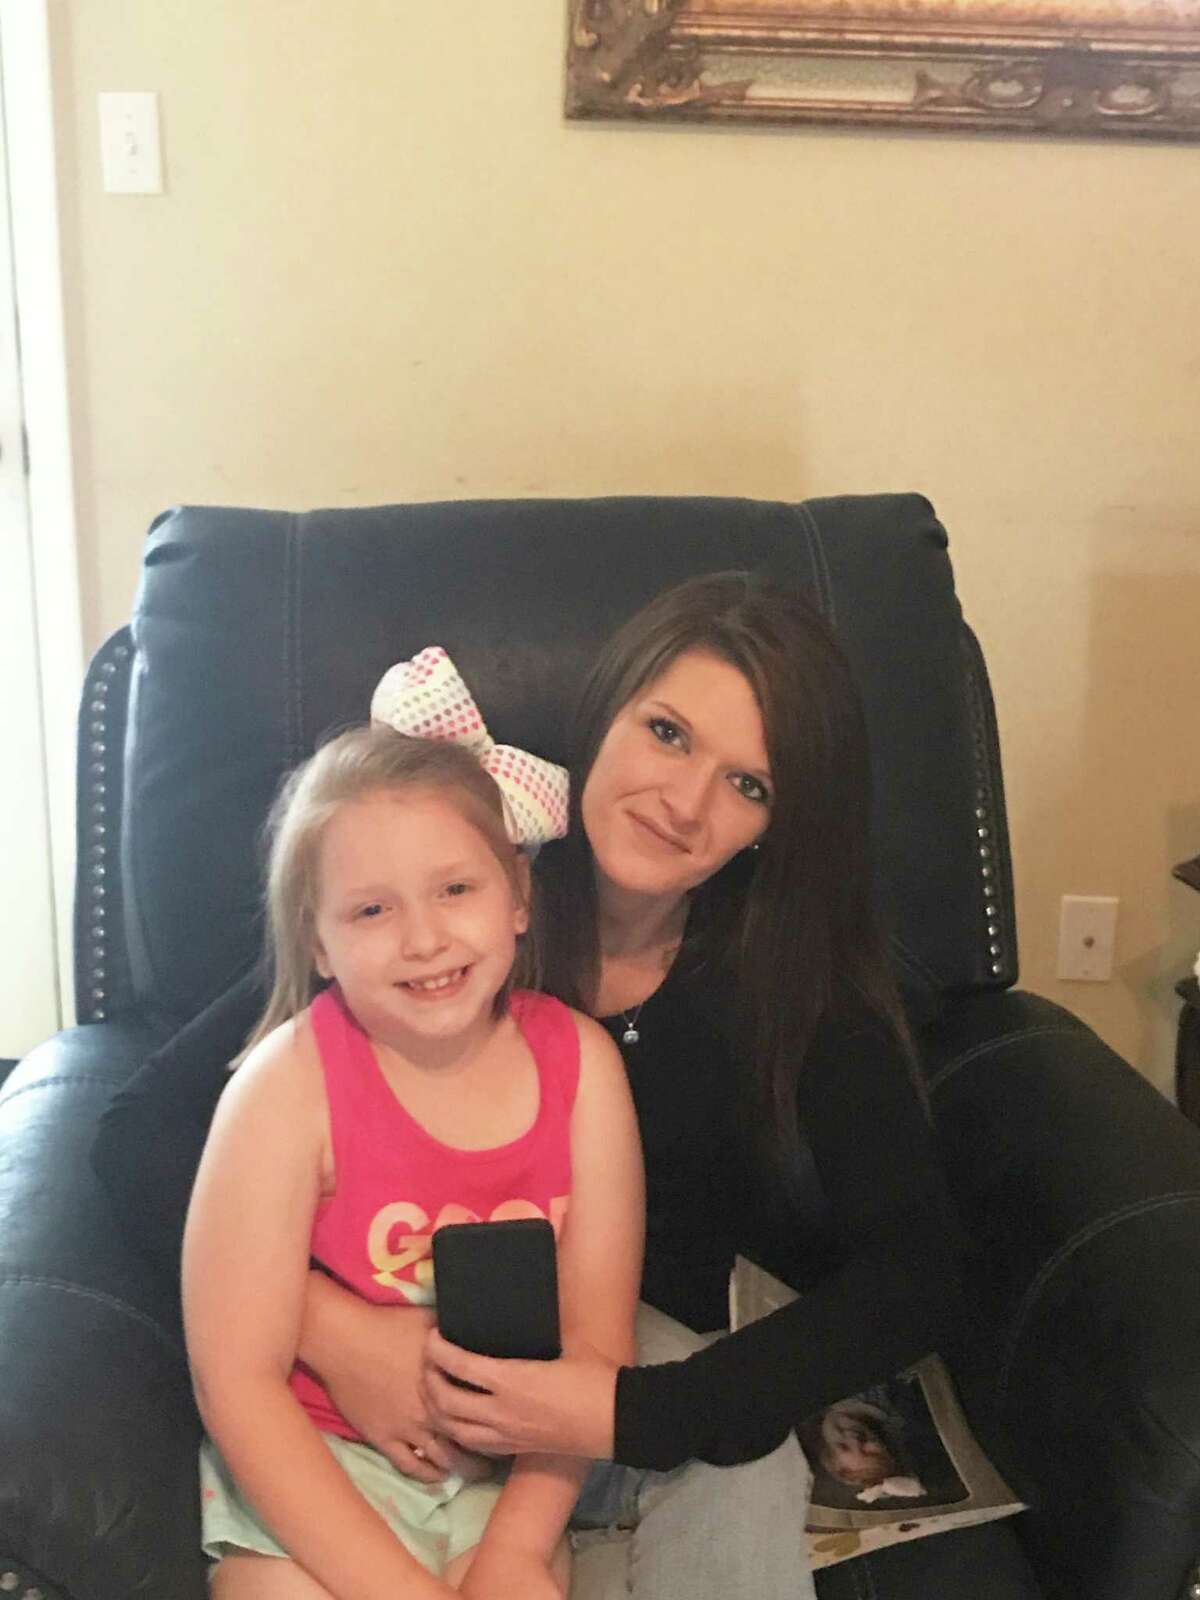 An undated photo of Bailey Finch of Columbus, Miss. (R). Finch sued Norwalk, Conn.-based Pepperidge Farm on Aug. 8, 2018, blaming a salmonella infection she contracted on Goldfish crackers that the company recalled in July 2018, with Pepperidge Farm stating it does not believe the product caused Finch's illness.